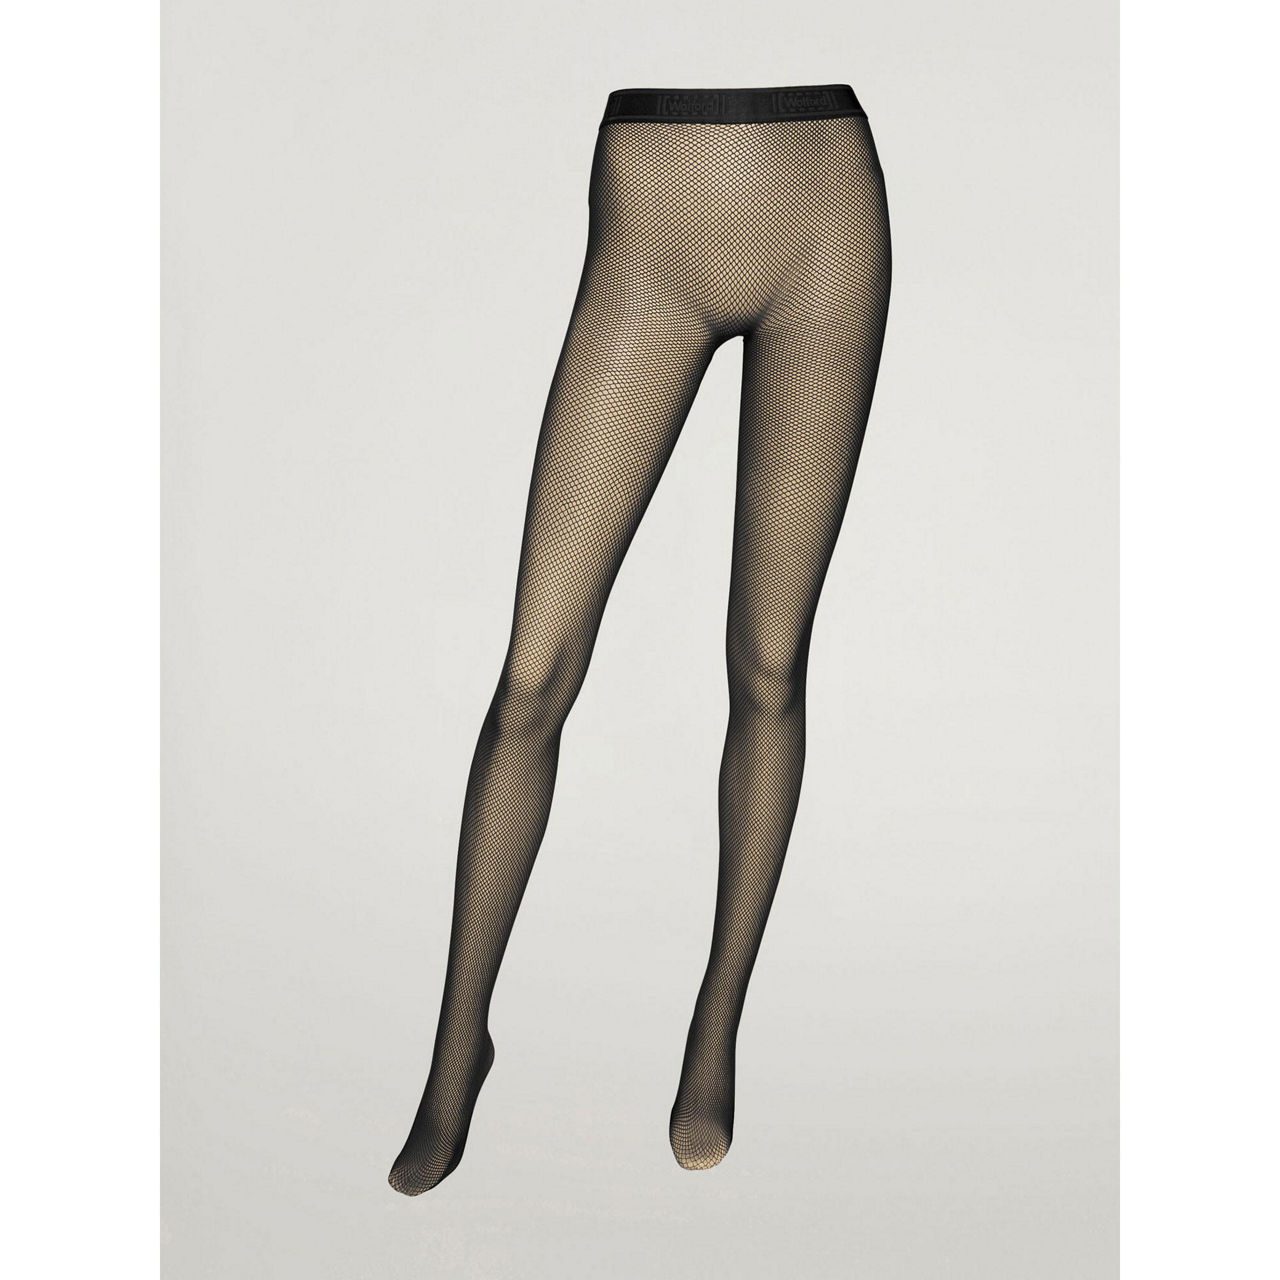 Couture 40 Denier Opaque Tights at the Hosiery Box Opaque Tights - The  Hosiery Box